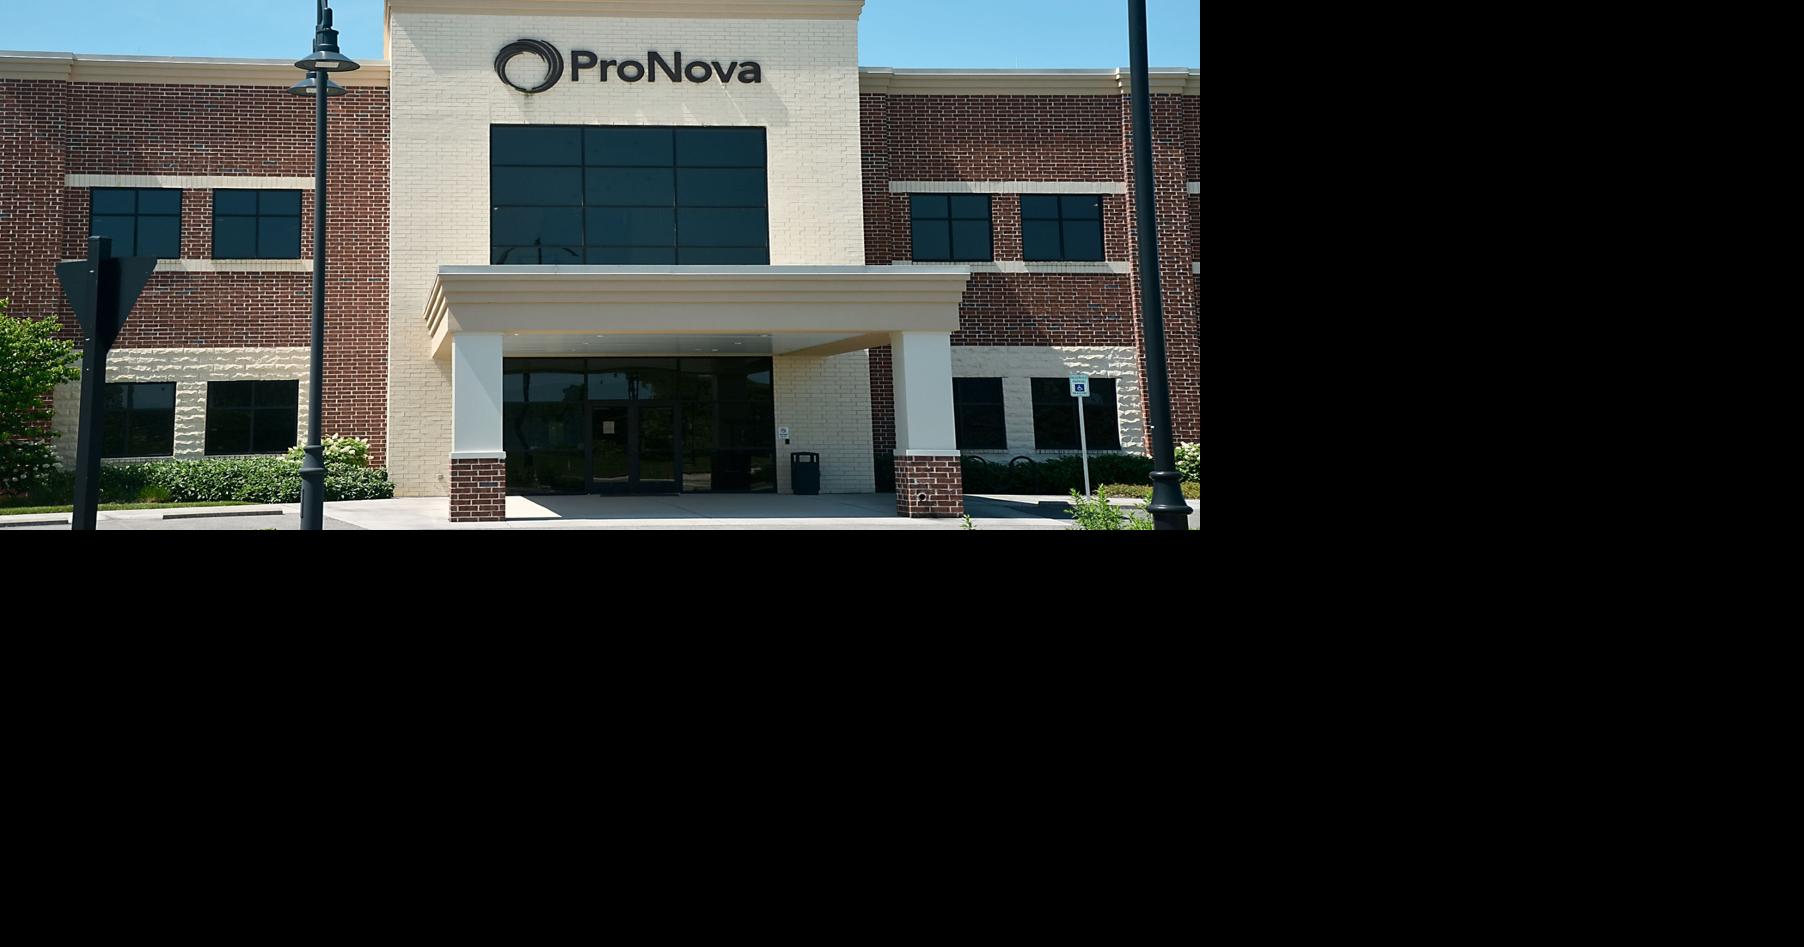 ProNova sued $550k for contract breaches | News | thedailytimes.com